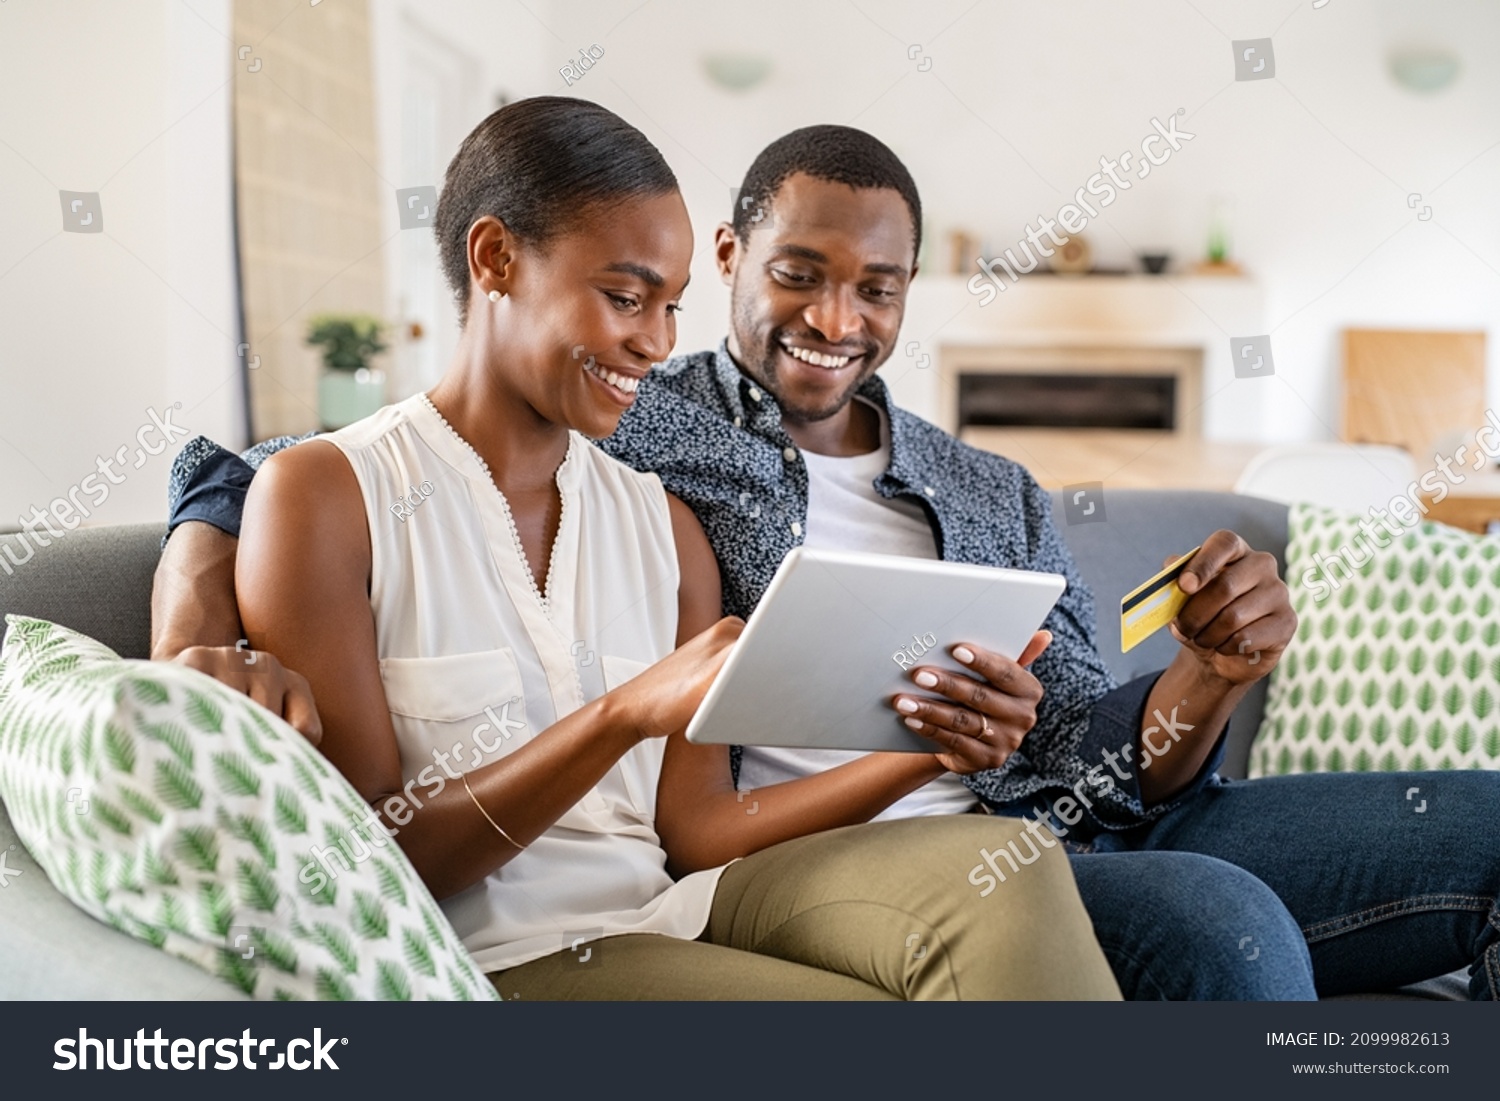 Black wife doing shopping online while using digital tablet at home with husband. Couple using bank card to pay bills or to book their next vacation. Mature couple making an online purchase. #2099982613